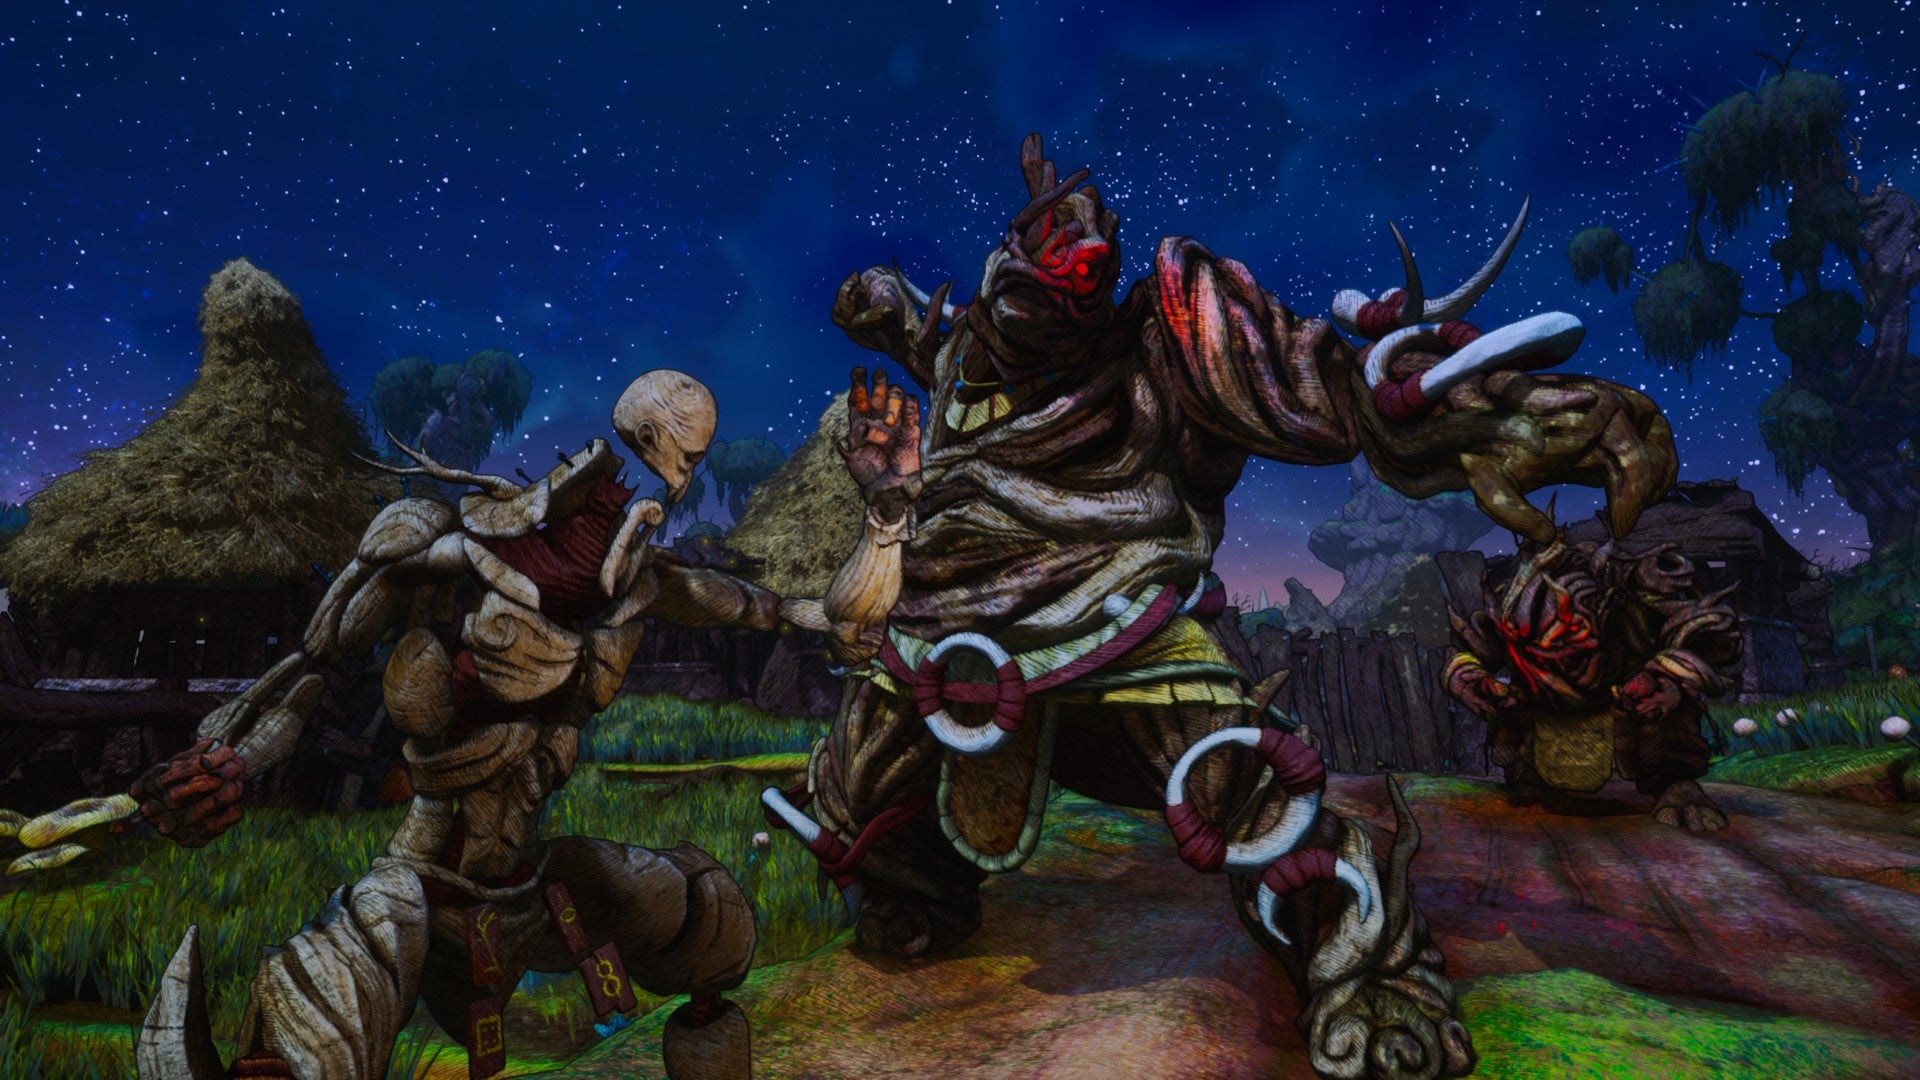 A screenshot from Clash: Artifacts Of Chaos which shows night time Pseudo (whose encased in wood) fight a demonic big enemy.